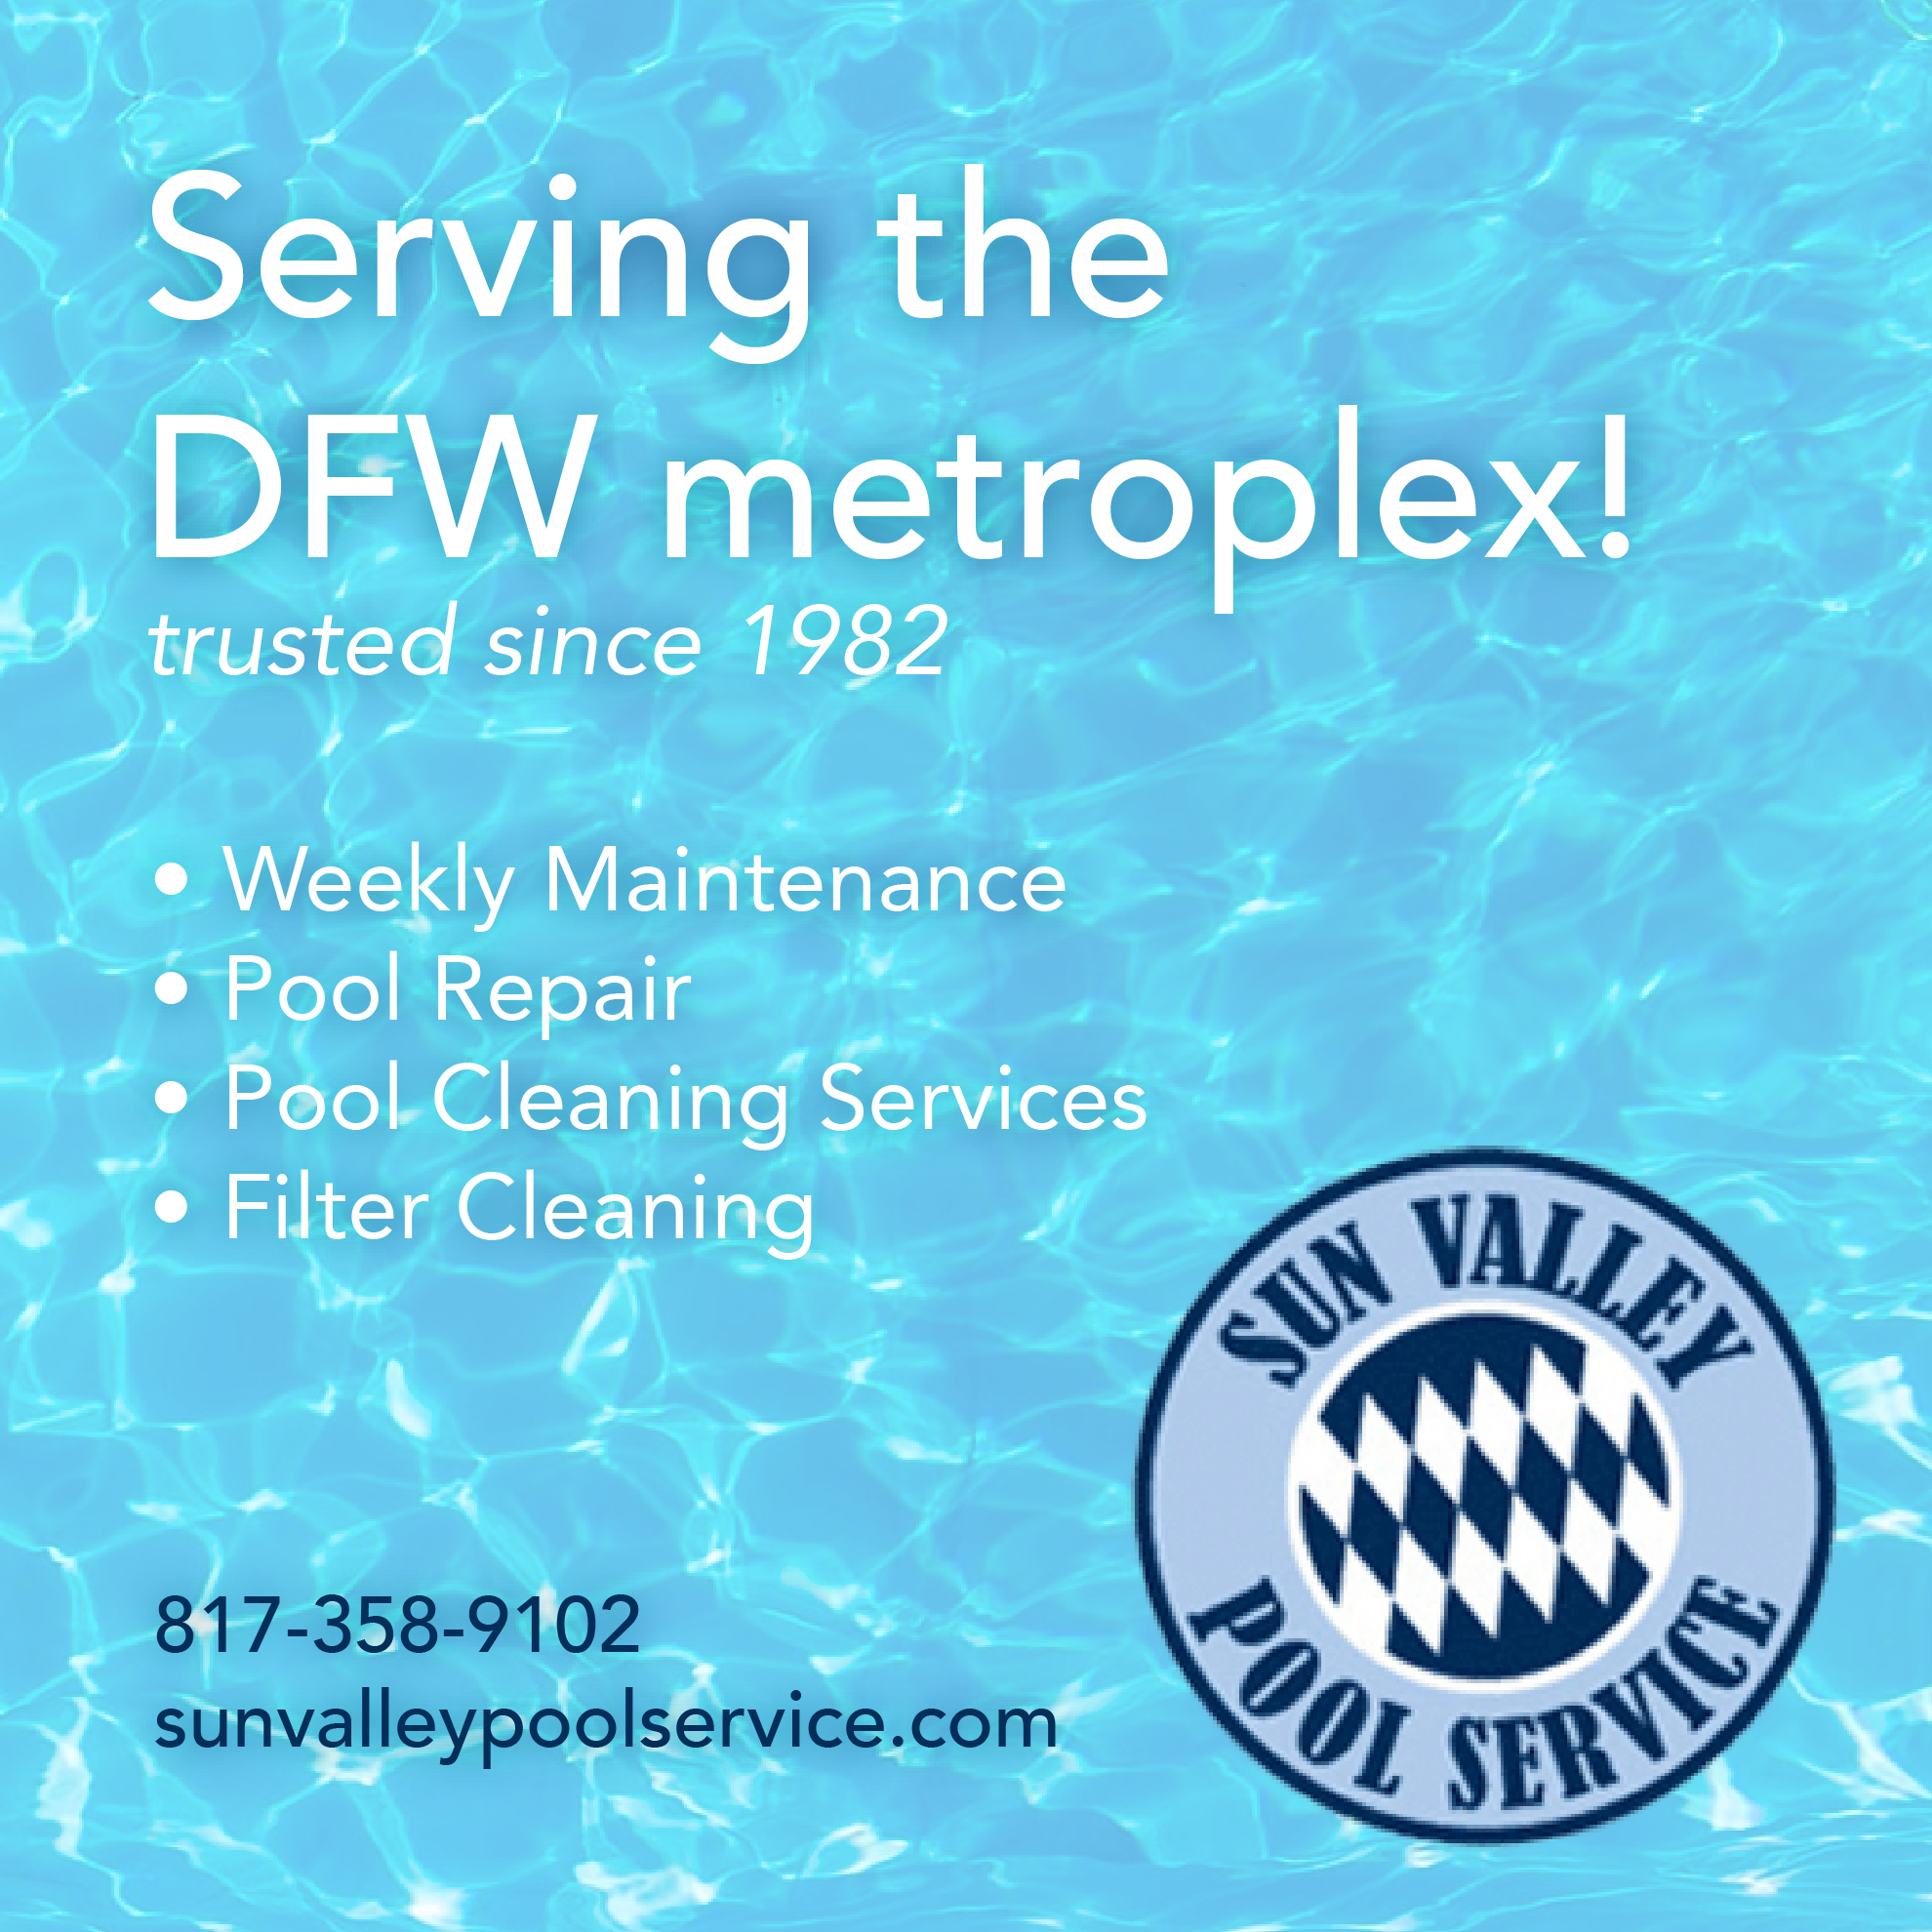 Sun Valley Pool Services